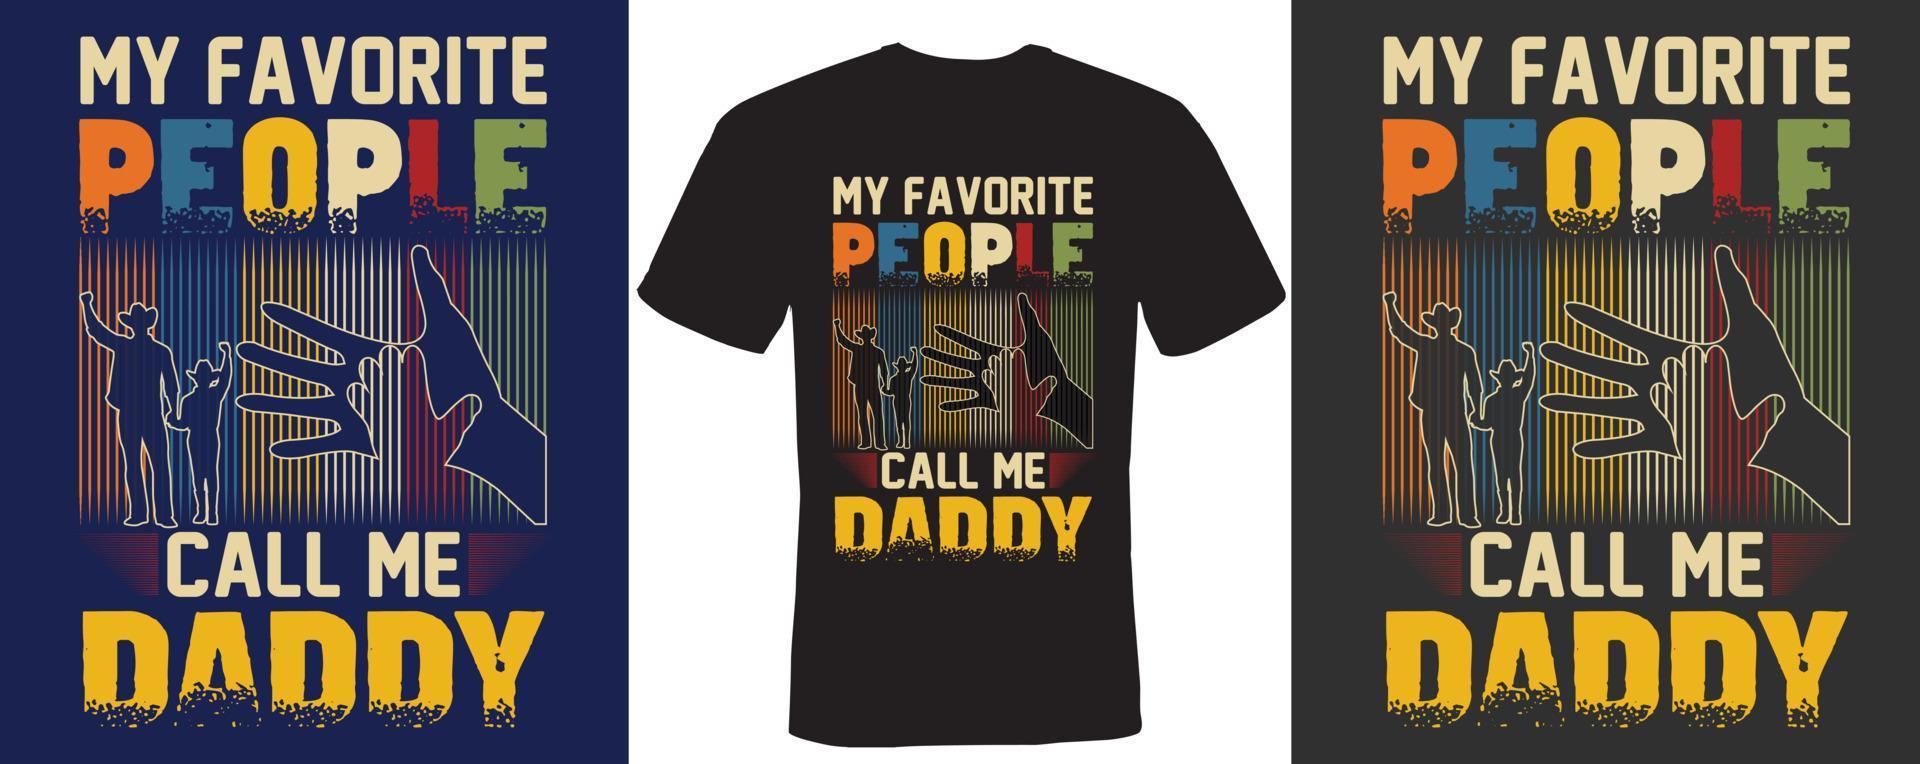 My favorite people call me daddy t-shirt design vector